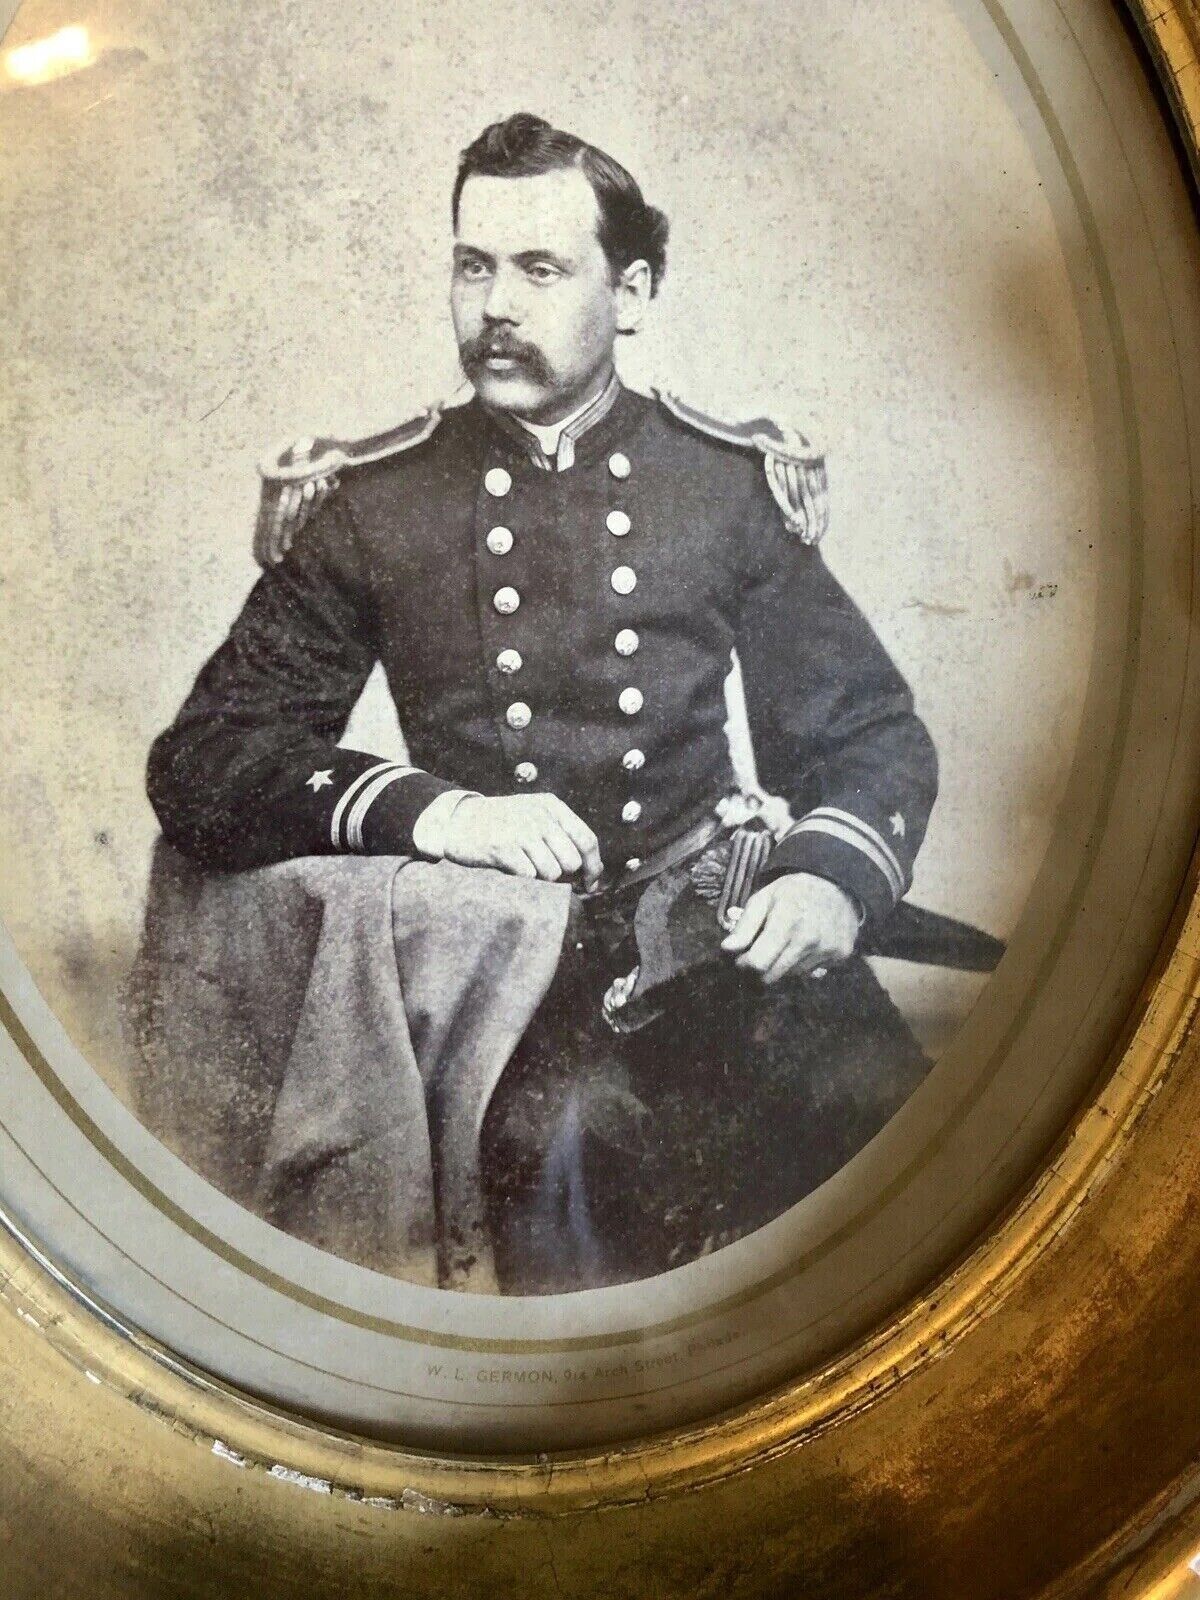 1860s GERMON Large Albumen Photo in Wall Frame ID'd Navy Commander Died ON Ship